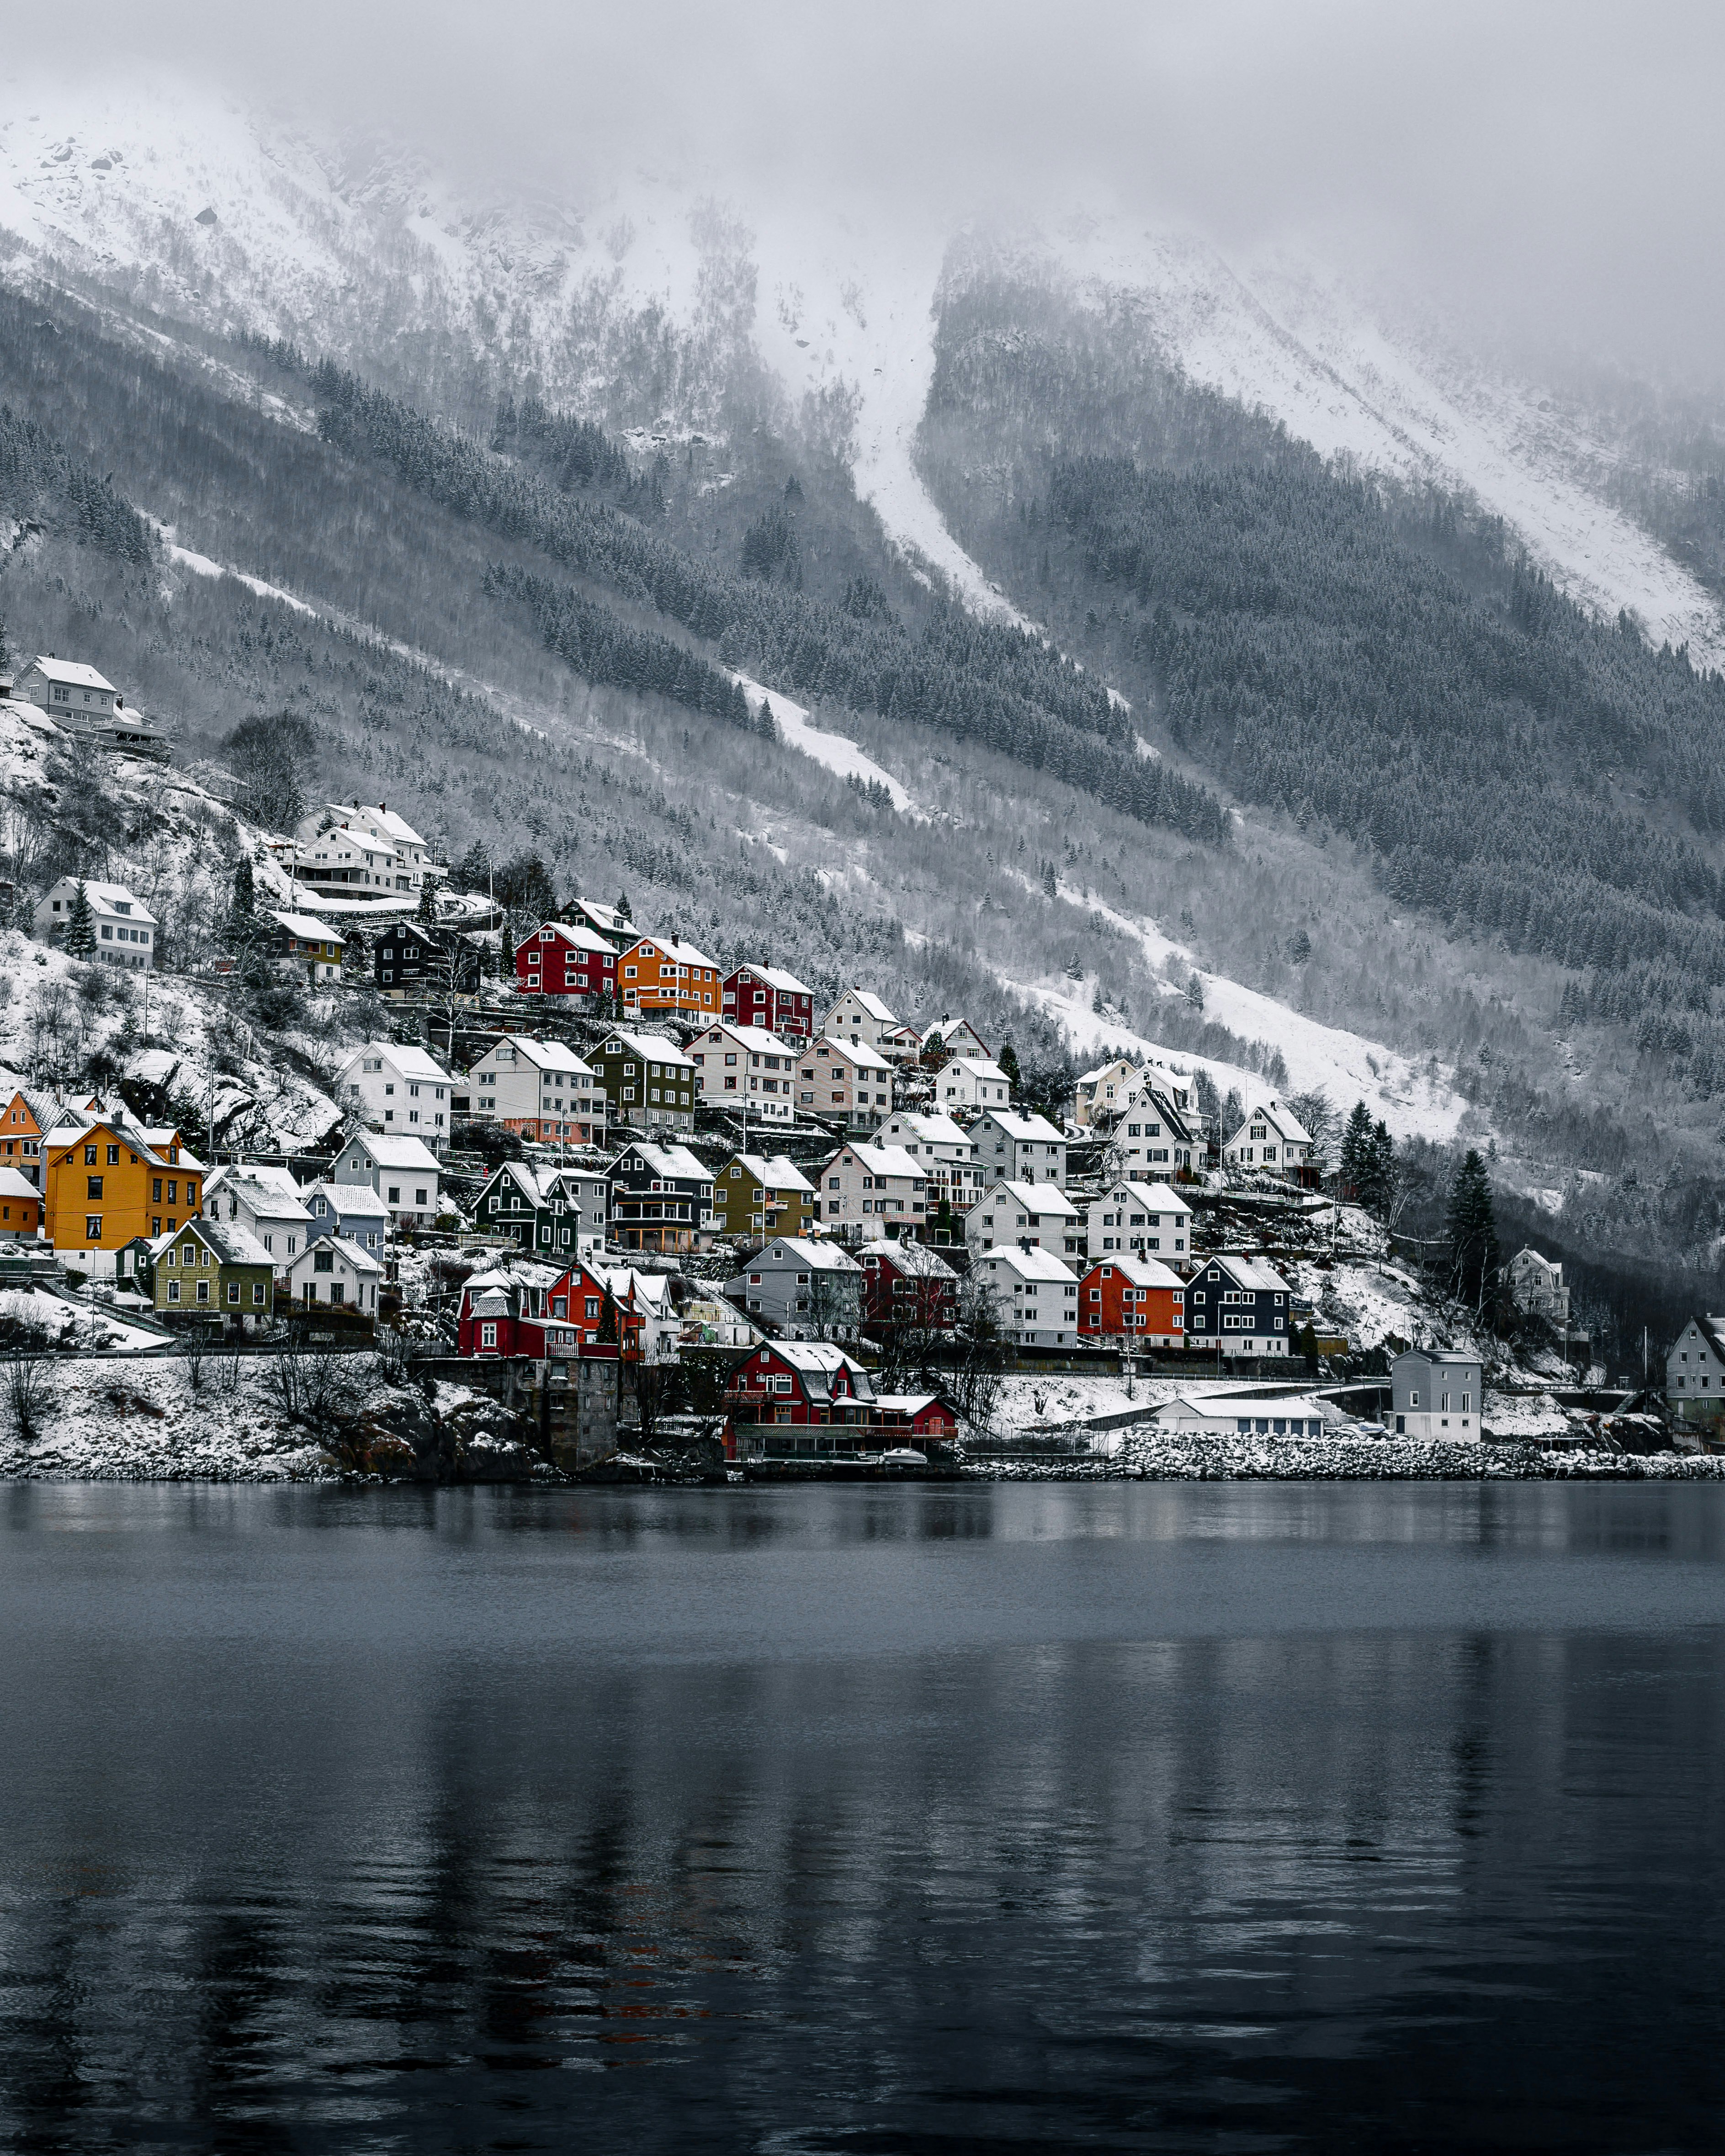 houses near body of water and snow covered mountain during daytime